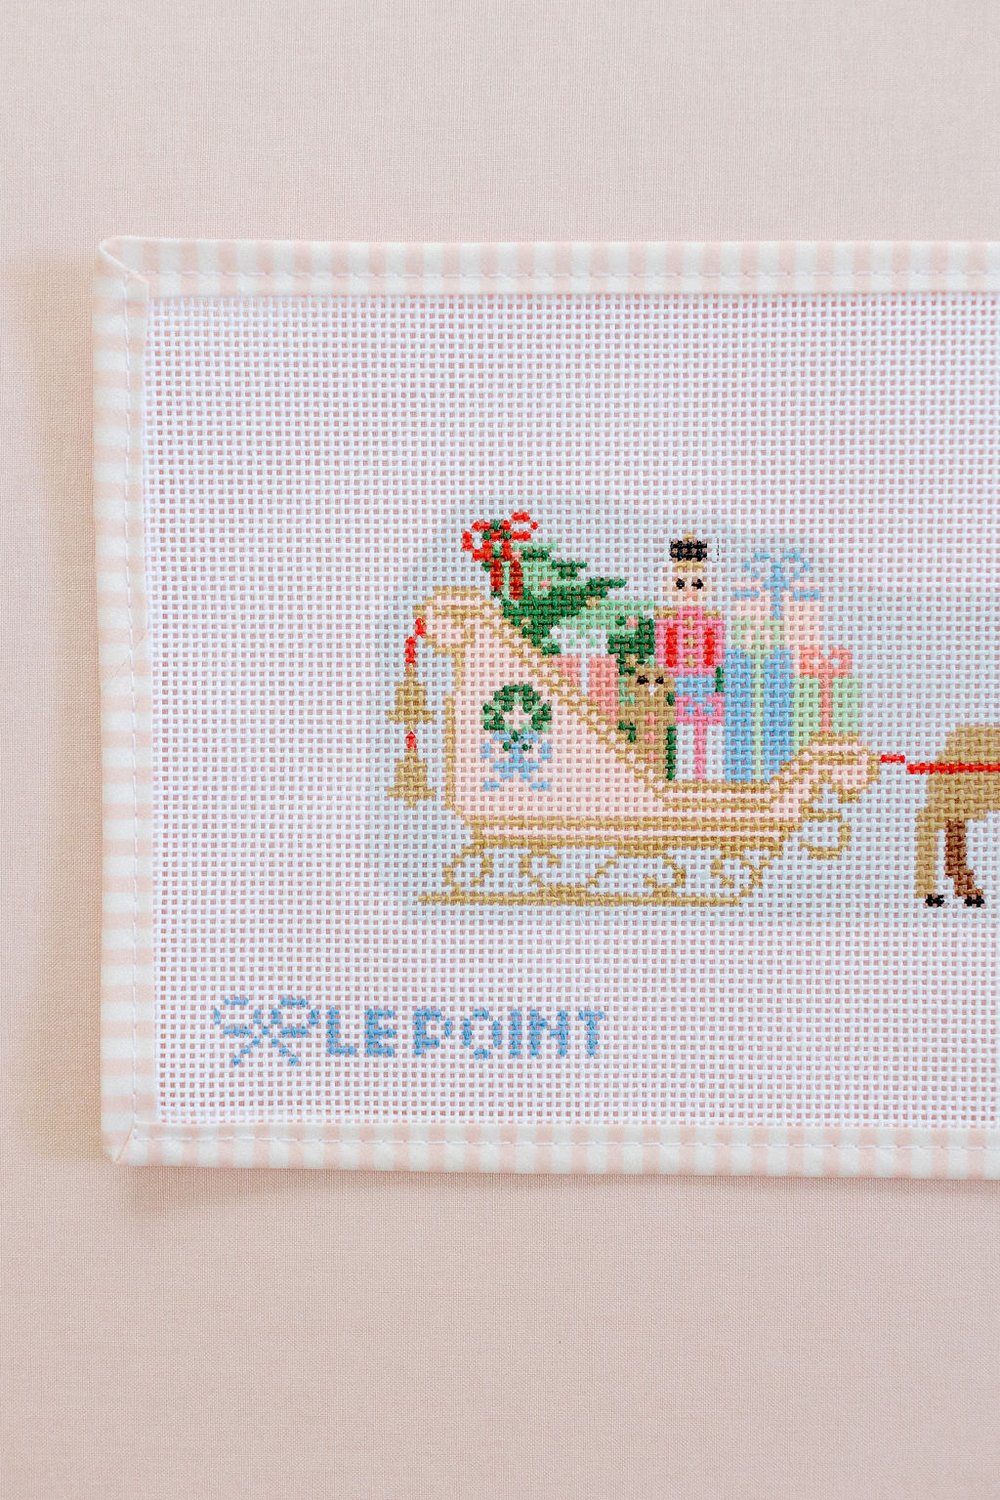 Le Point Studio on Instagram: I am incredibly excited to announce that we  will be launching a line of kids needlepoint kits! Meet Little Le Point. 💕  I have been working on